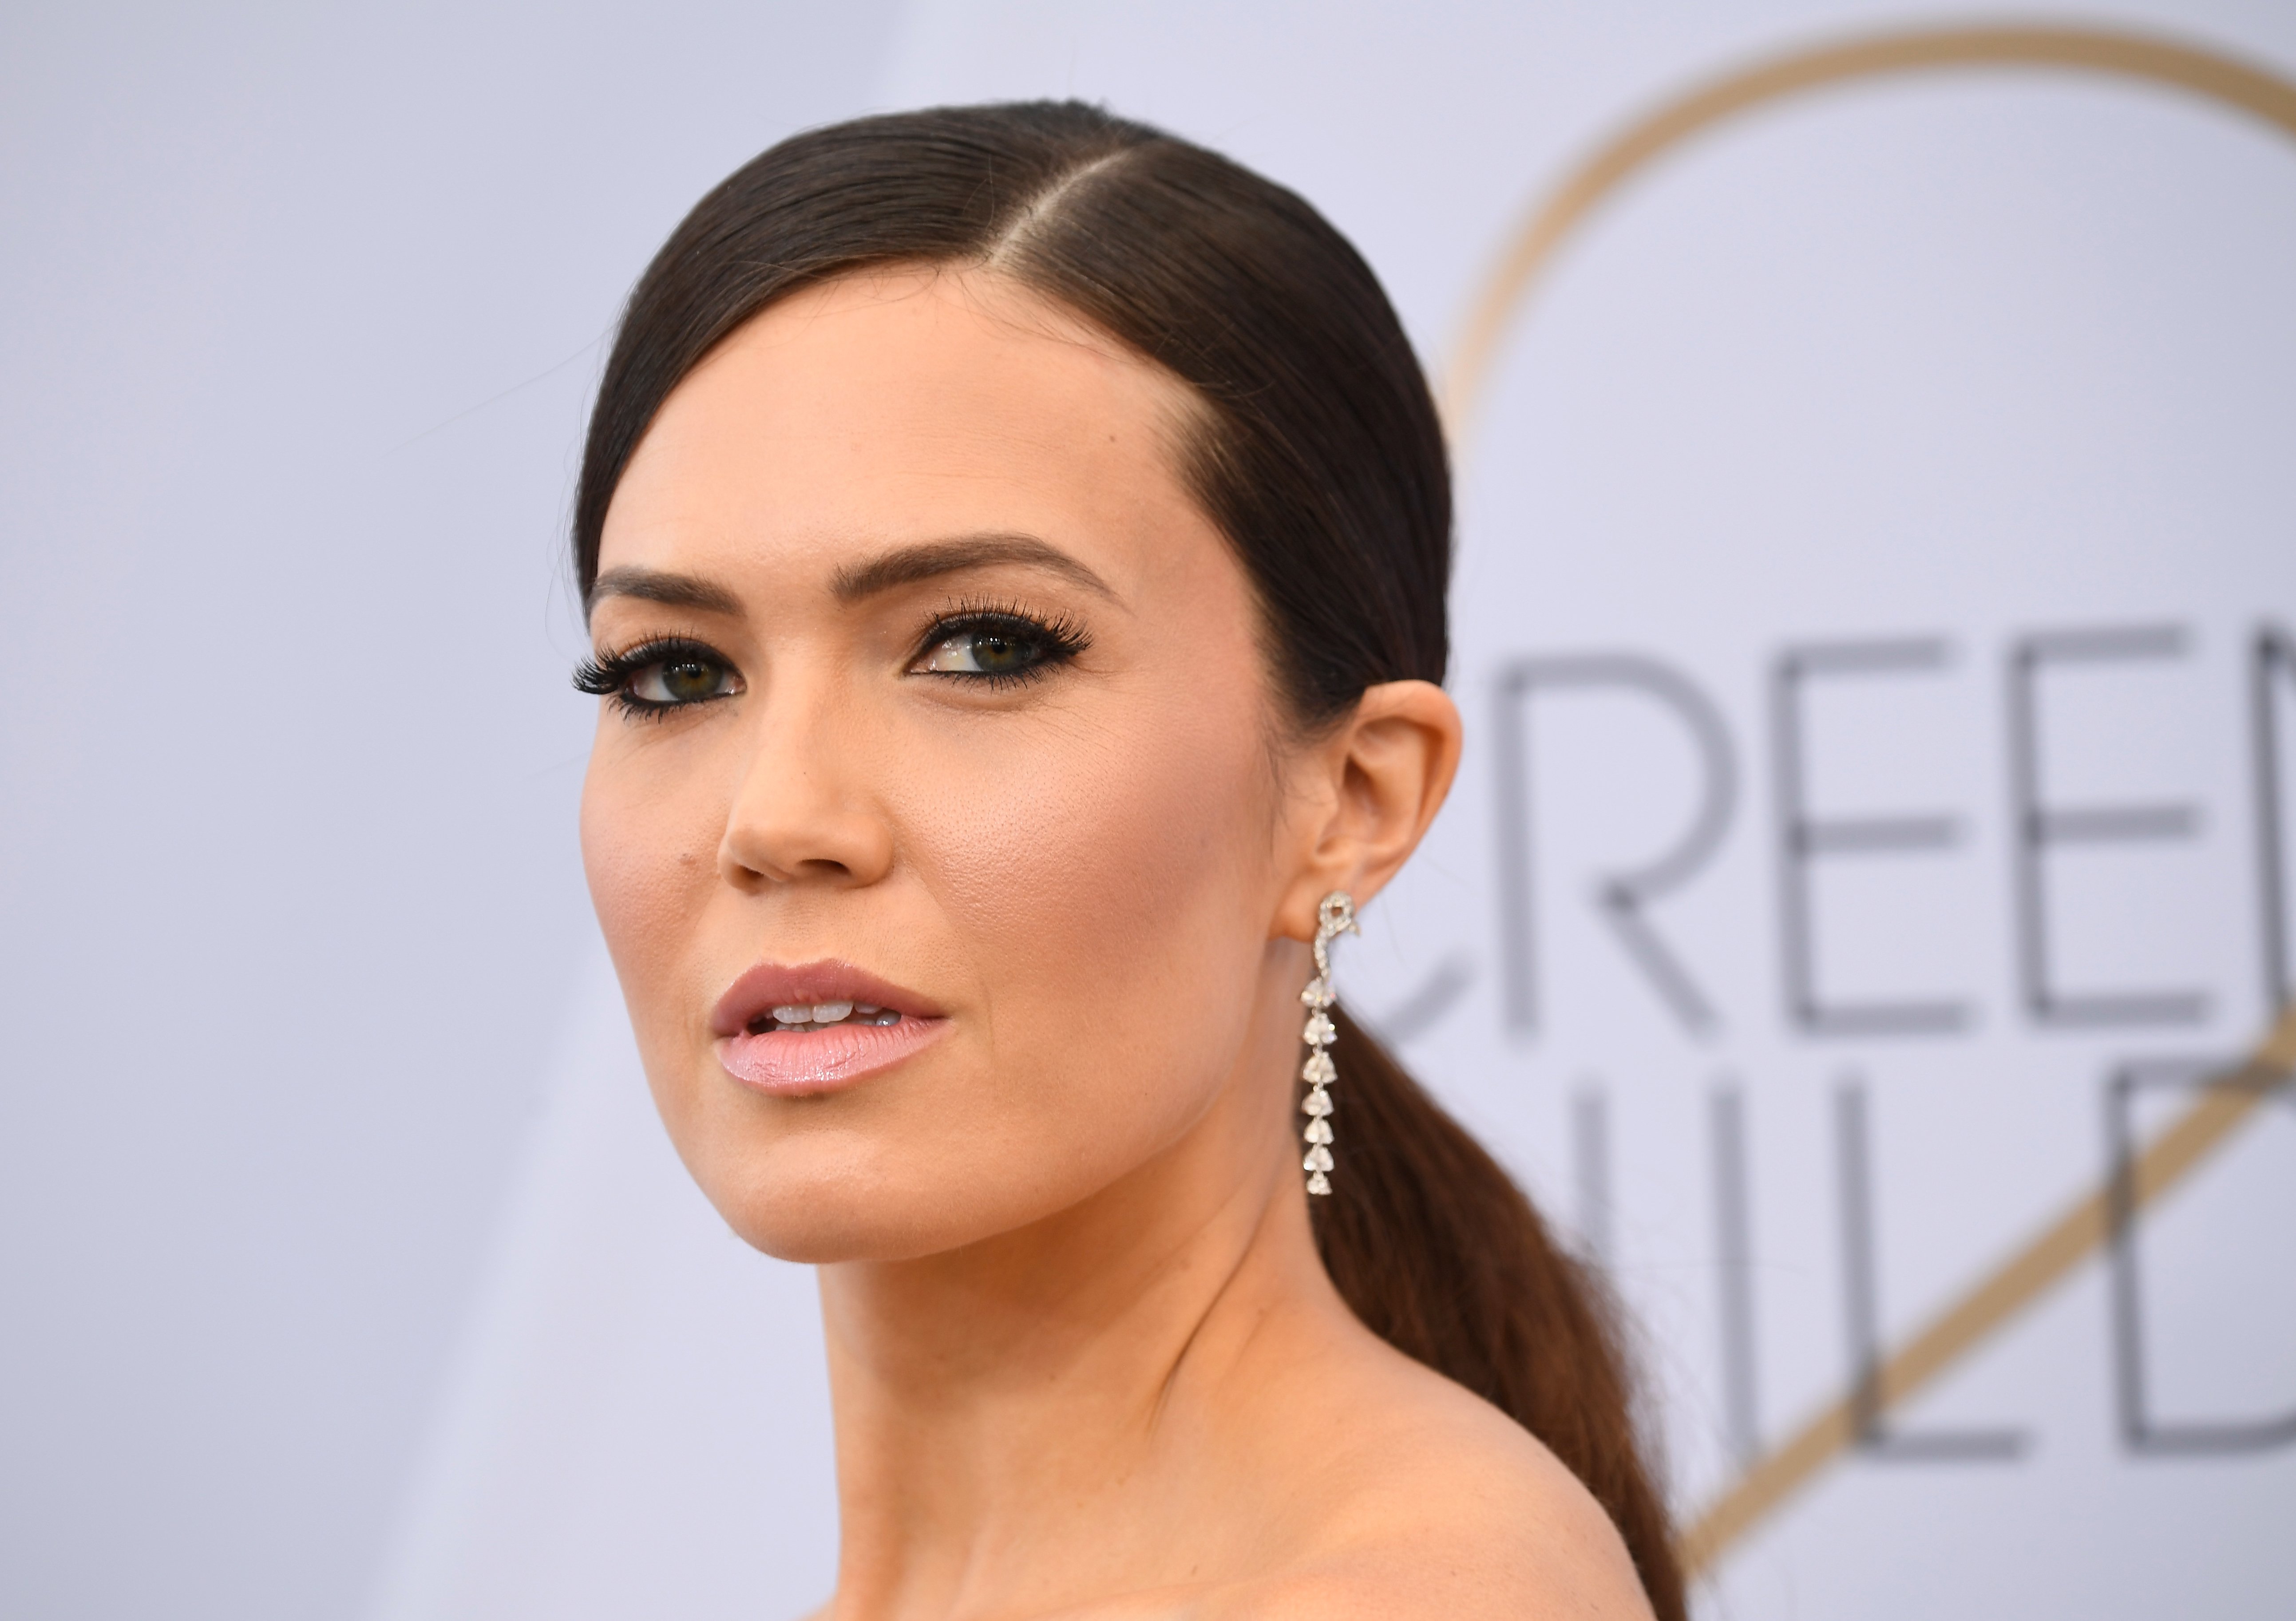 Mandy Moore attends the 25th Annual Screen Actors Guild Awards on January 27, 2019 | Photo: Getty Images.